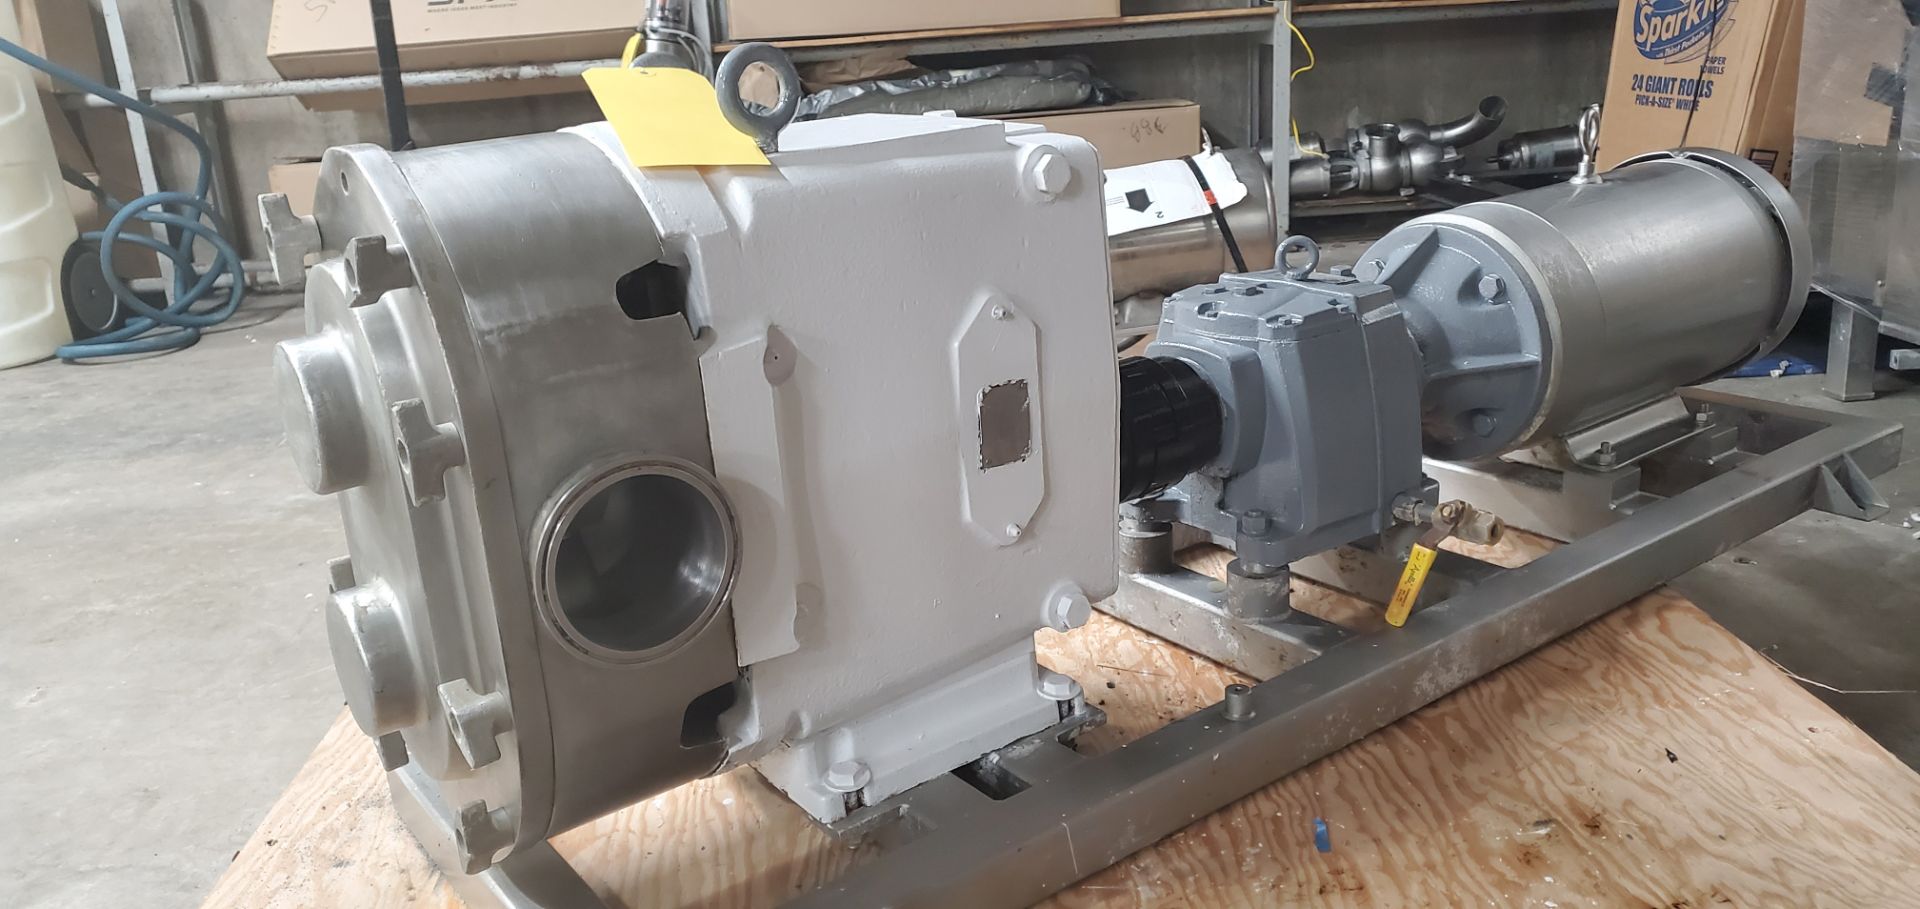 Size 220 Positive Displacement Pump with S/S Clad Baldor 7.5 HP Motor Mounted on S/S Frame - Rigging - Image 2 of 2